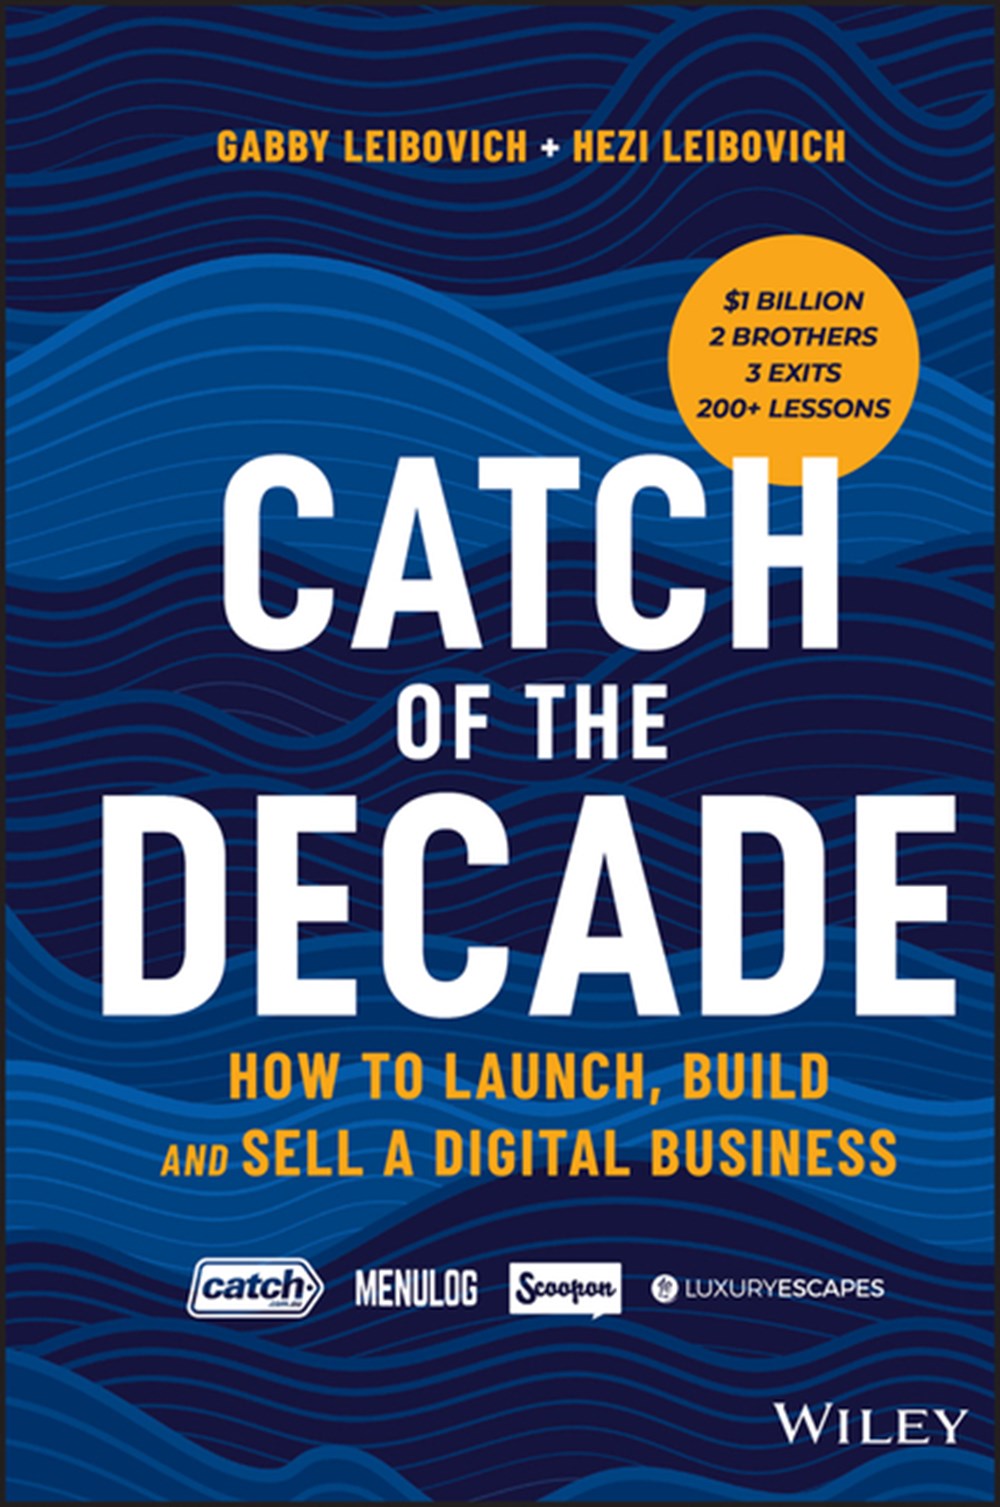 Catch of the Decade How to Launch, Build and Sell a Digital Business